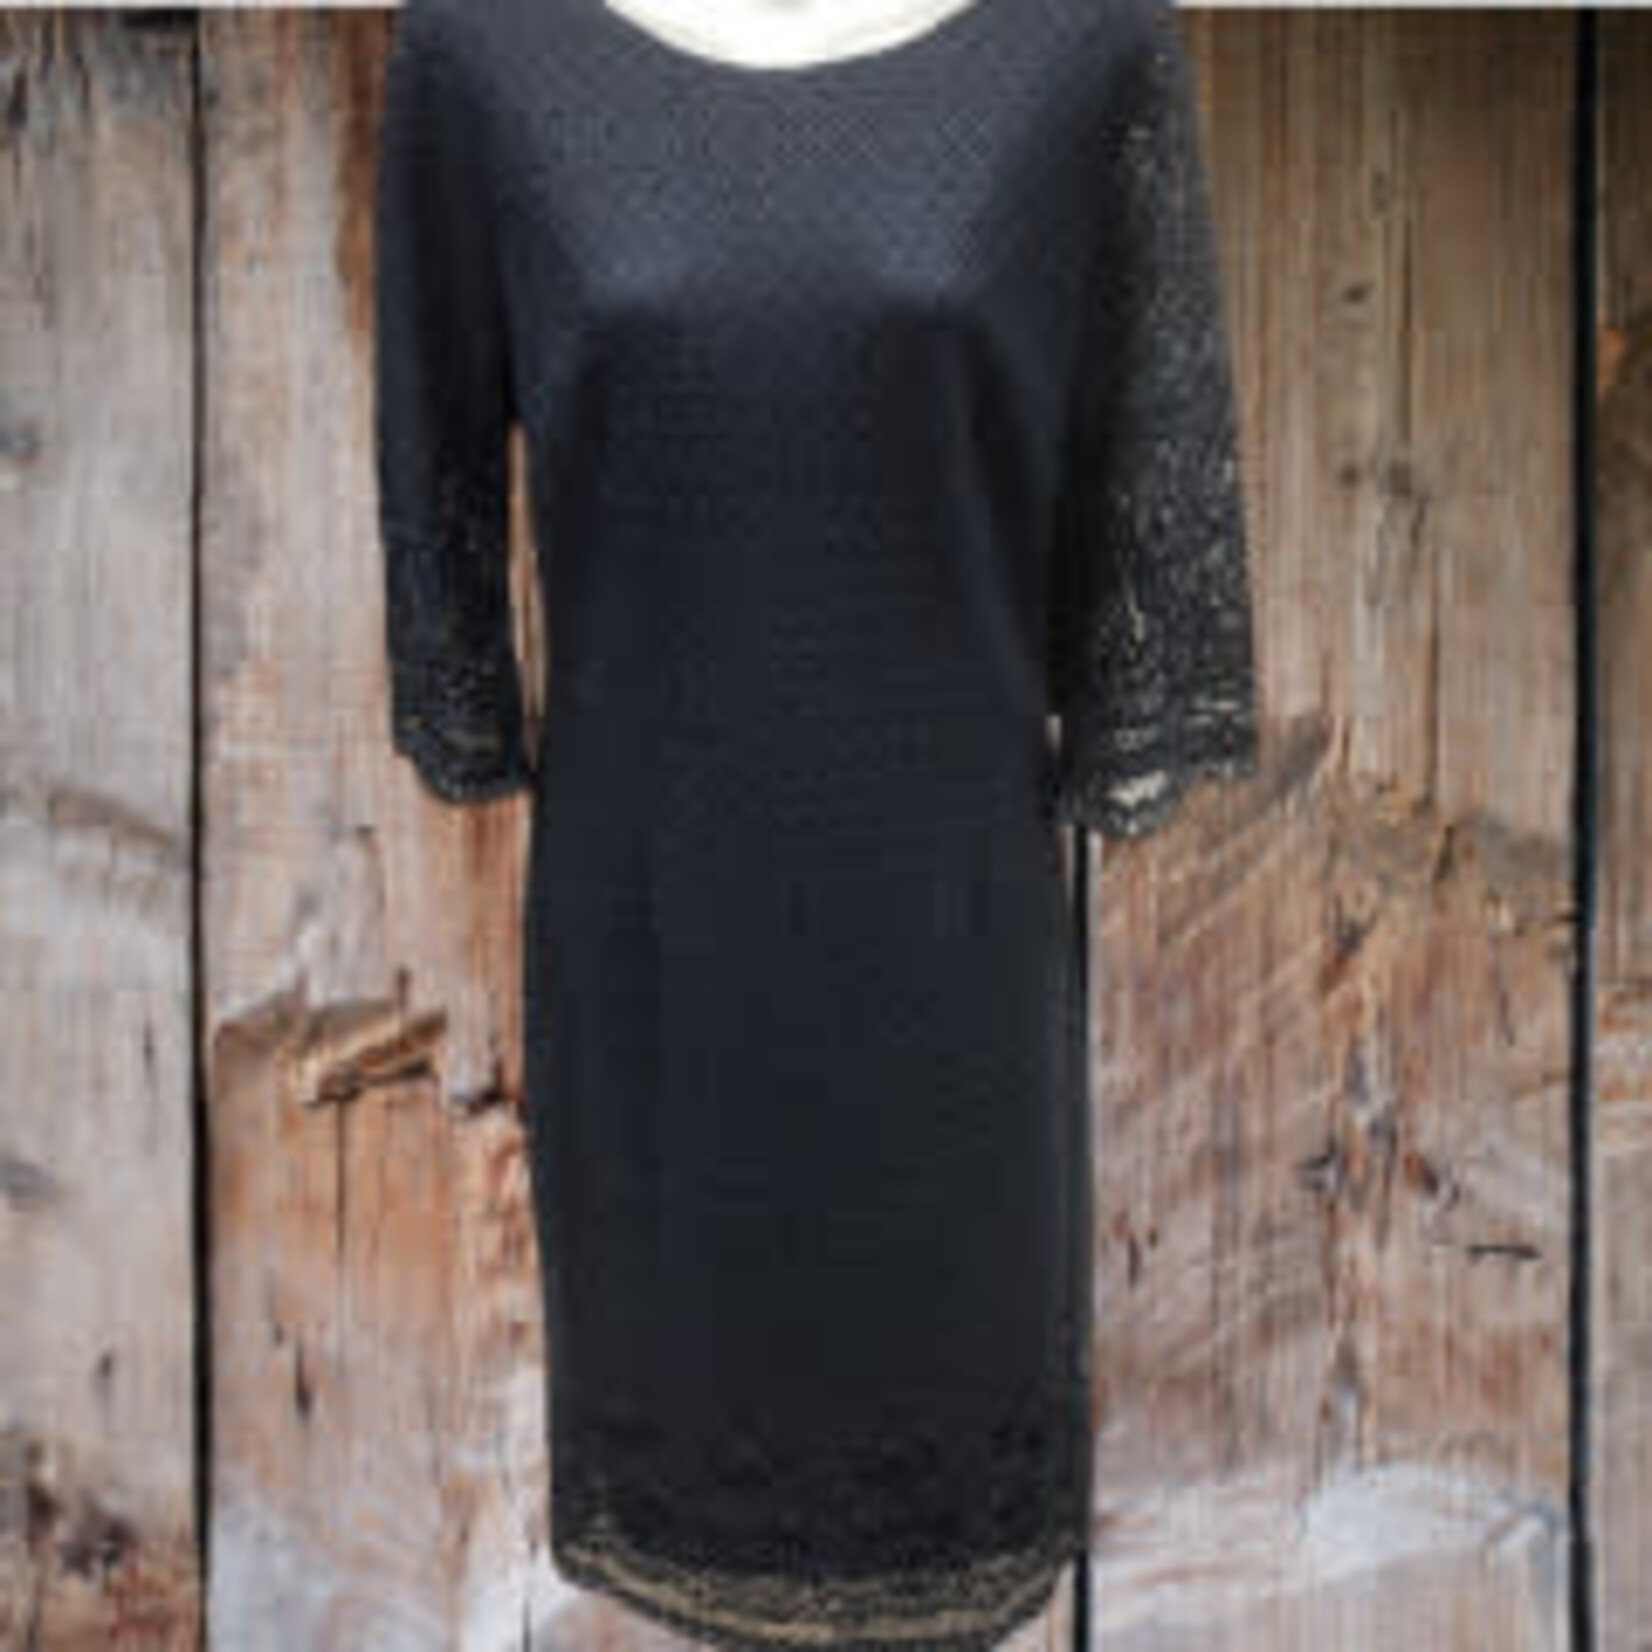 Yes A Dress Navy Soft Woven Lace 3/4 Sleeve Dress